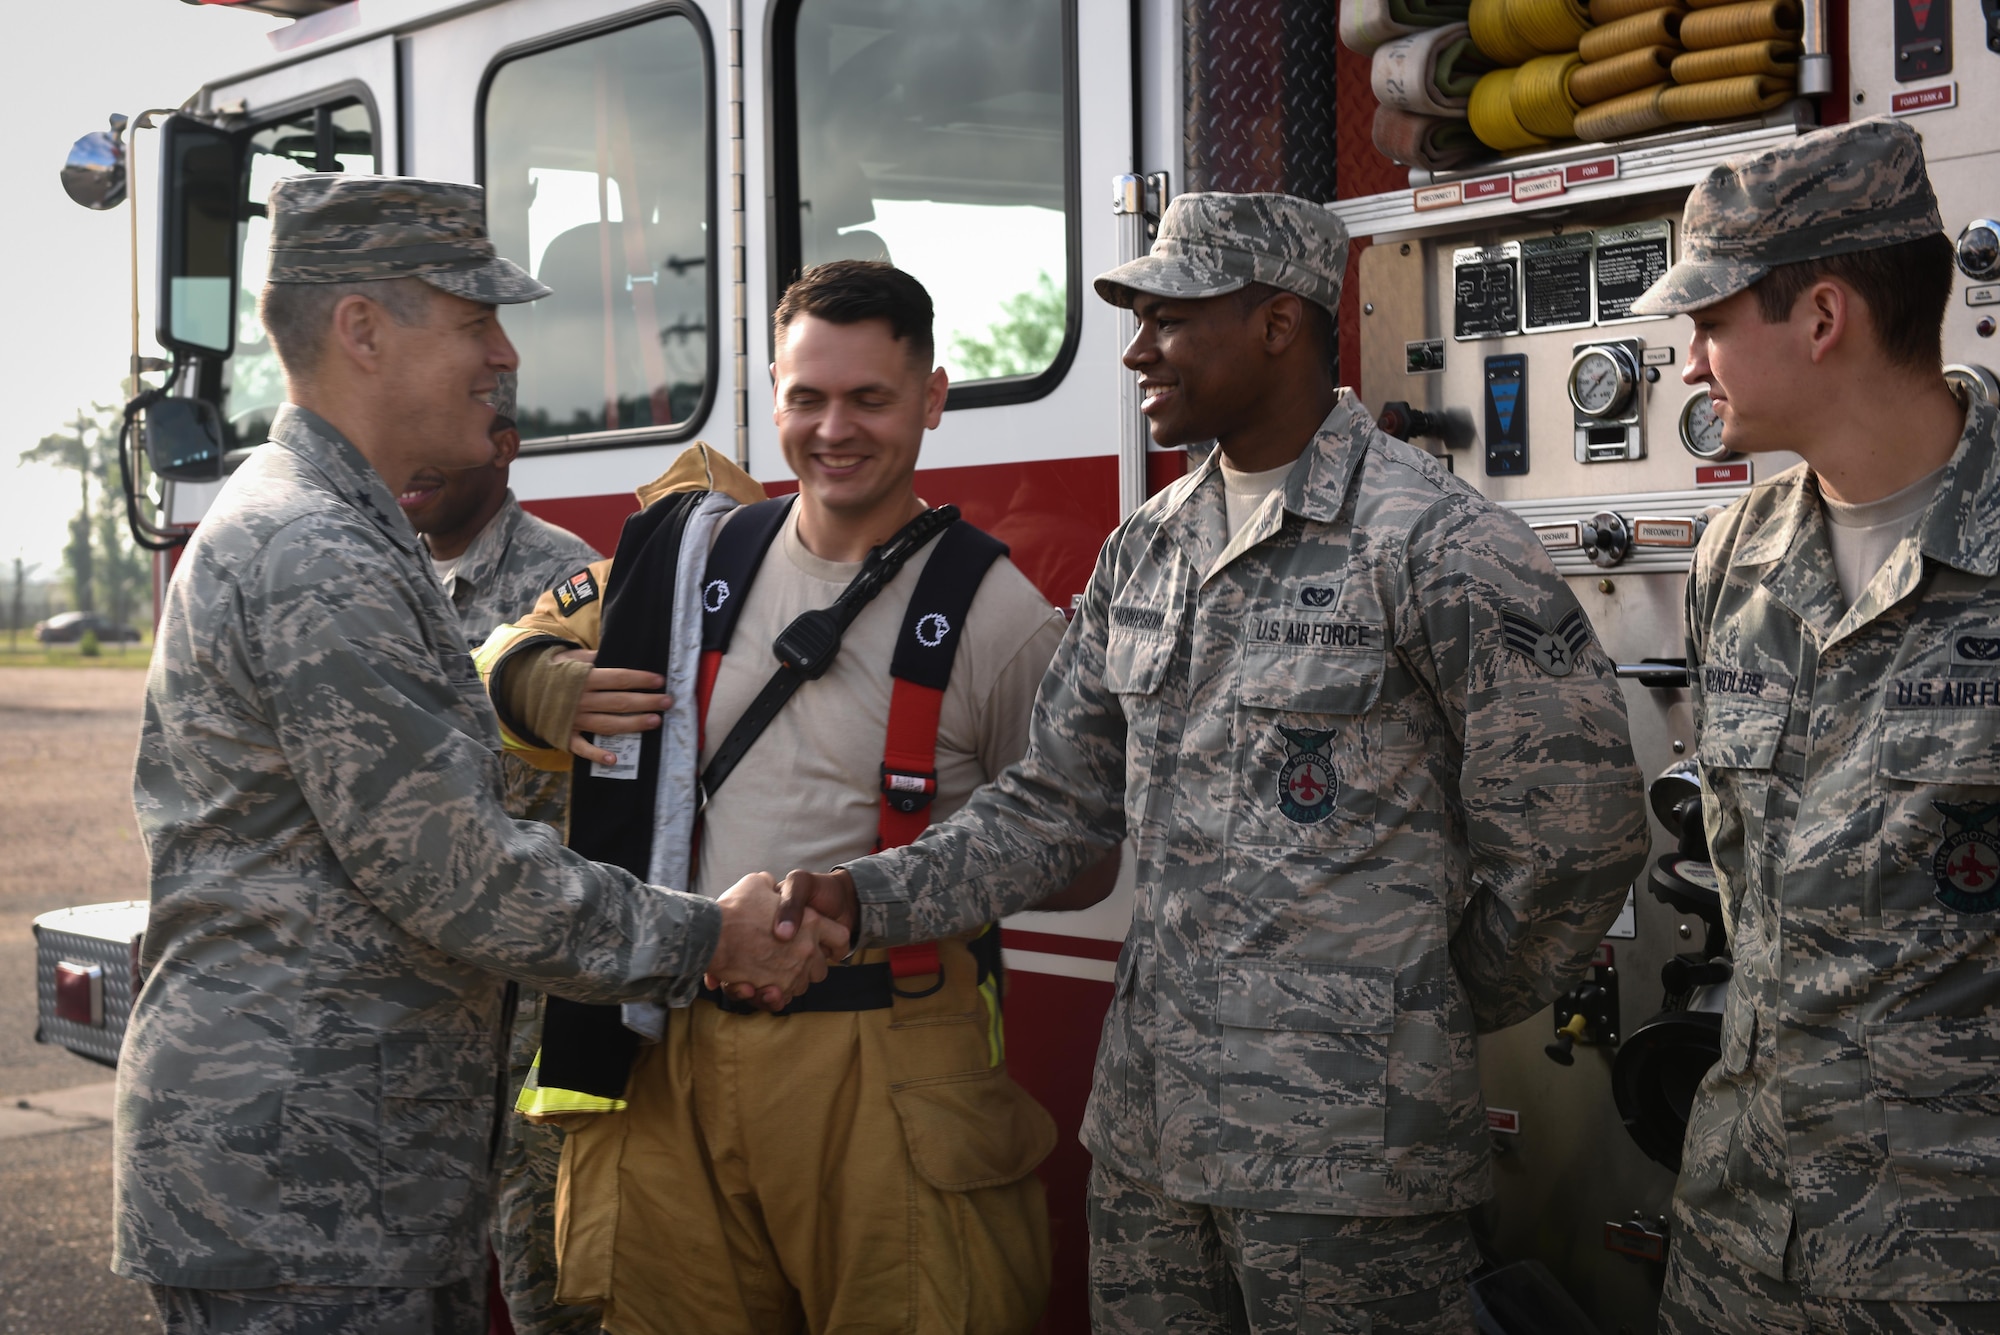 Maj. Gen. Thomas Bussiere, 8th Air Force commander, visits with 2nd Civil Engineer Squadron firefighters at Barksdale Air Force Base, La., April 21, 2017. The 2nd Civil Engineer Squadron Fire Department provides support to the 2nd Bomb Wing, 8th Air Force Headquarters and Air Force Global Strike Command Headquarters. (U.S. Air Force photo/Airman 1st Class Sydney Bennett)